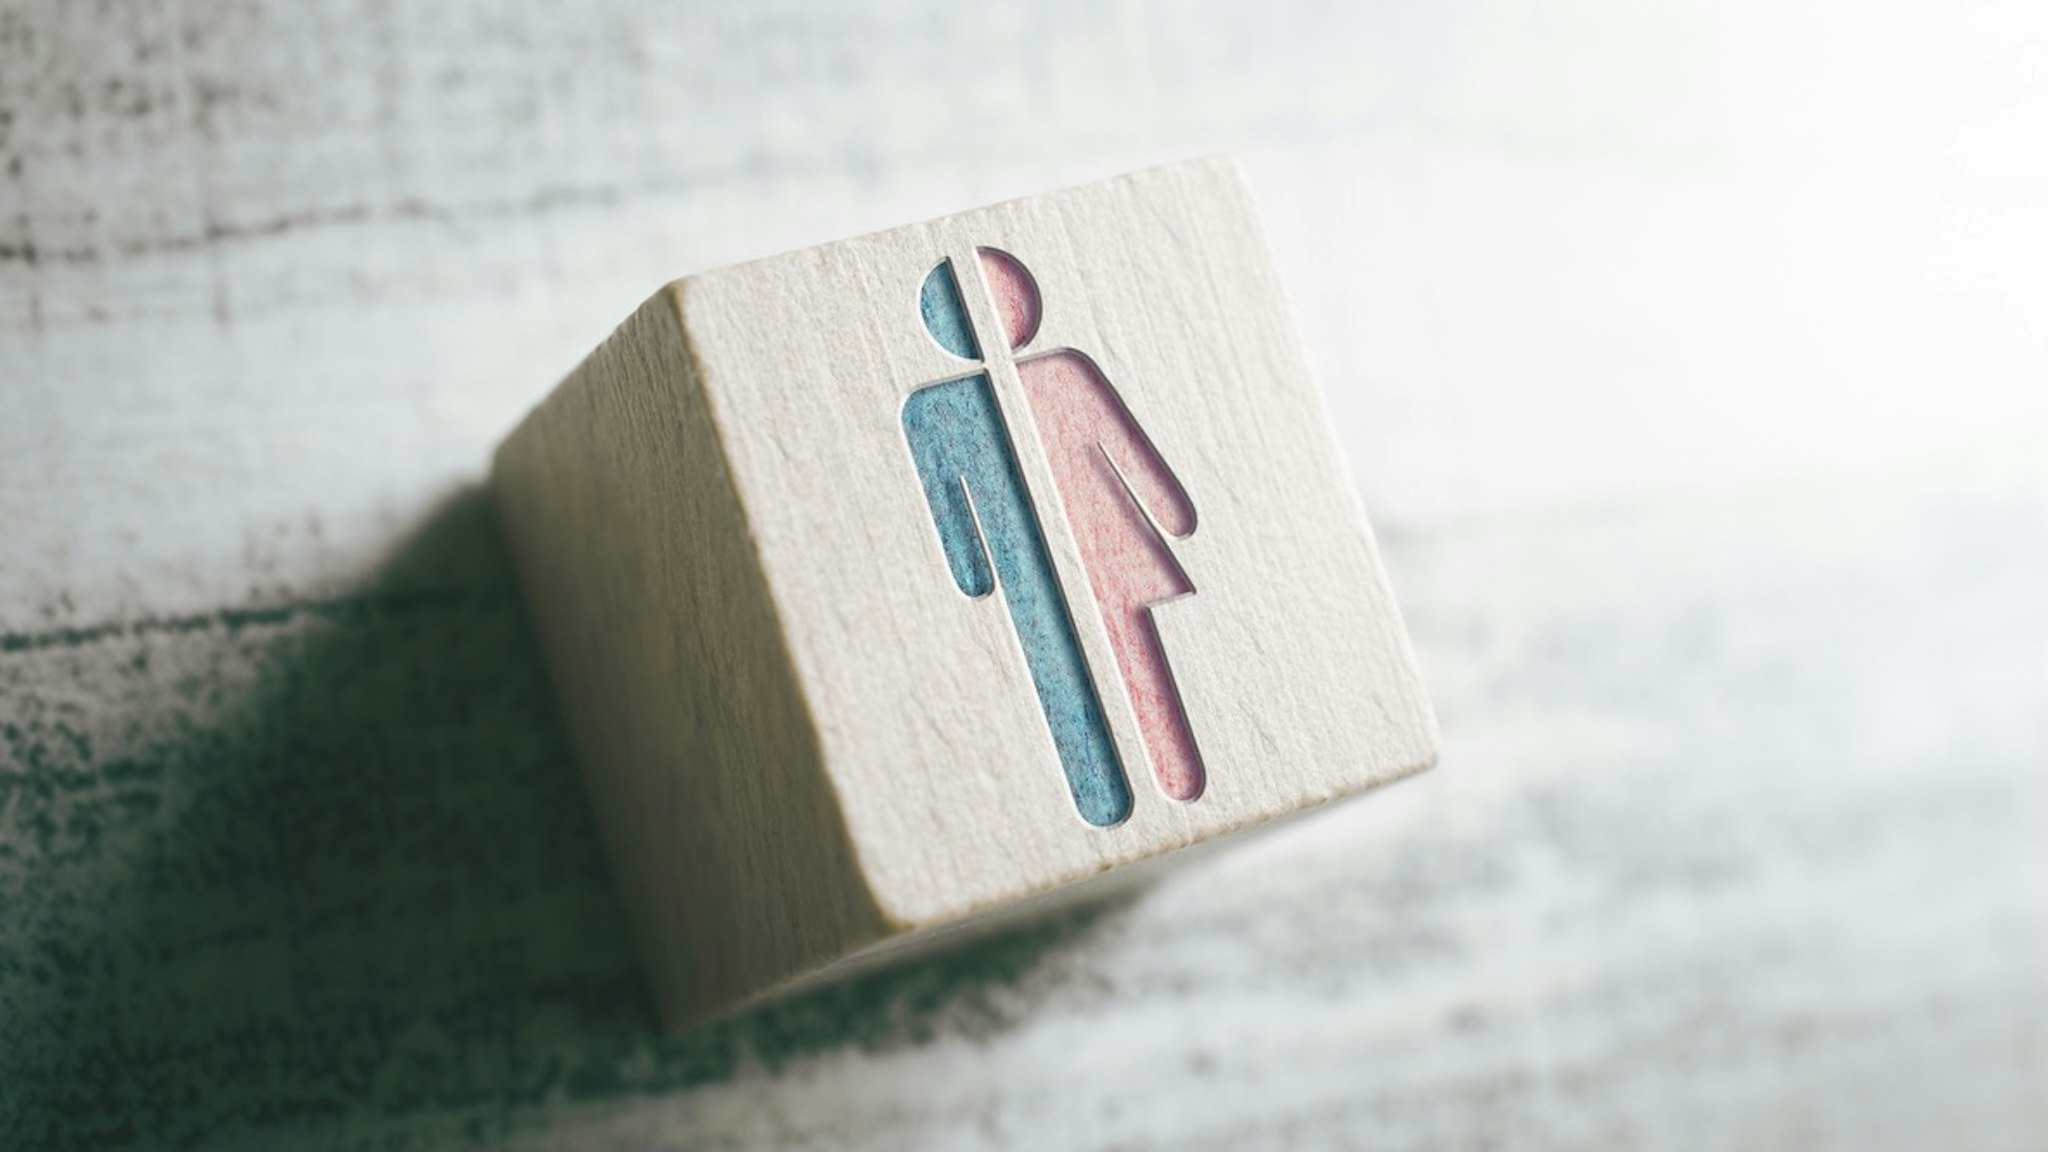 Gender Signs For Male And Female Cut In Half On A Wooden Block On A Table - stock photo Gender Icons For Male And Female Cut In Half On Wooden Block On A Table Devenorr via Getty Images